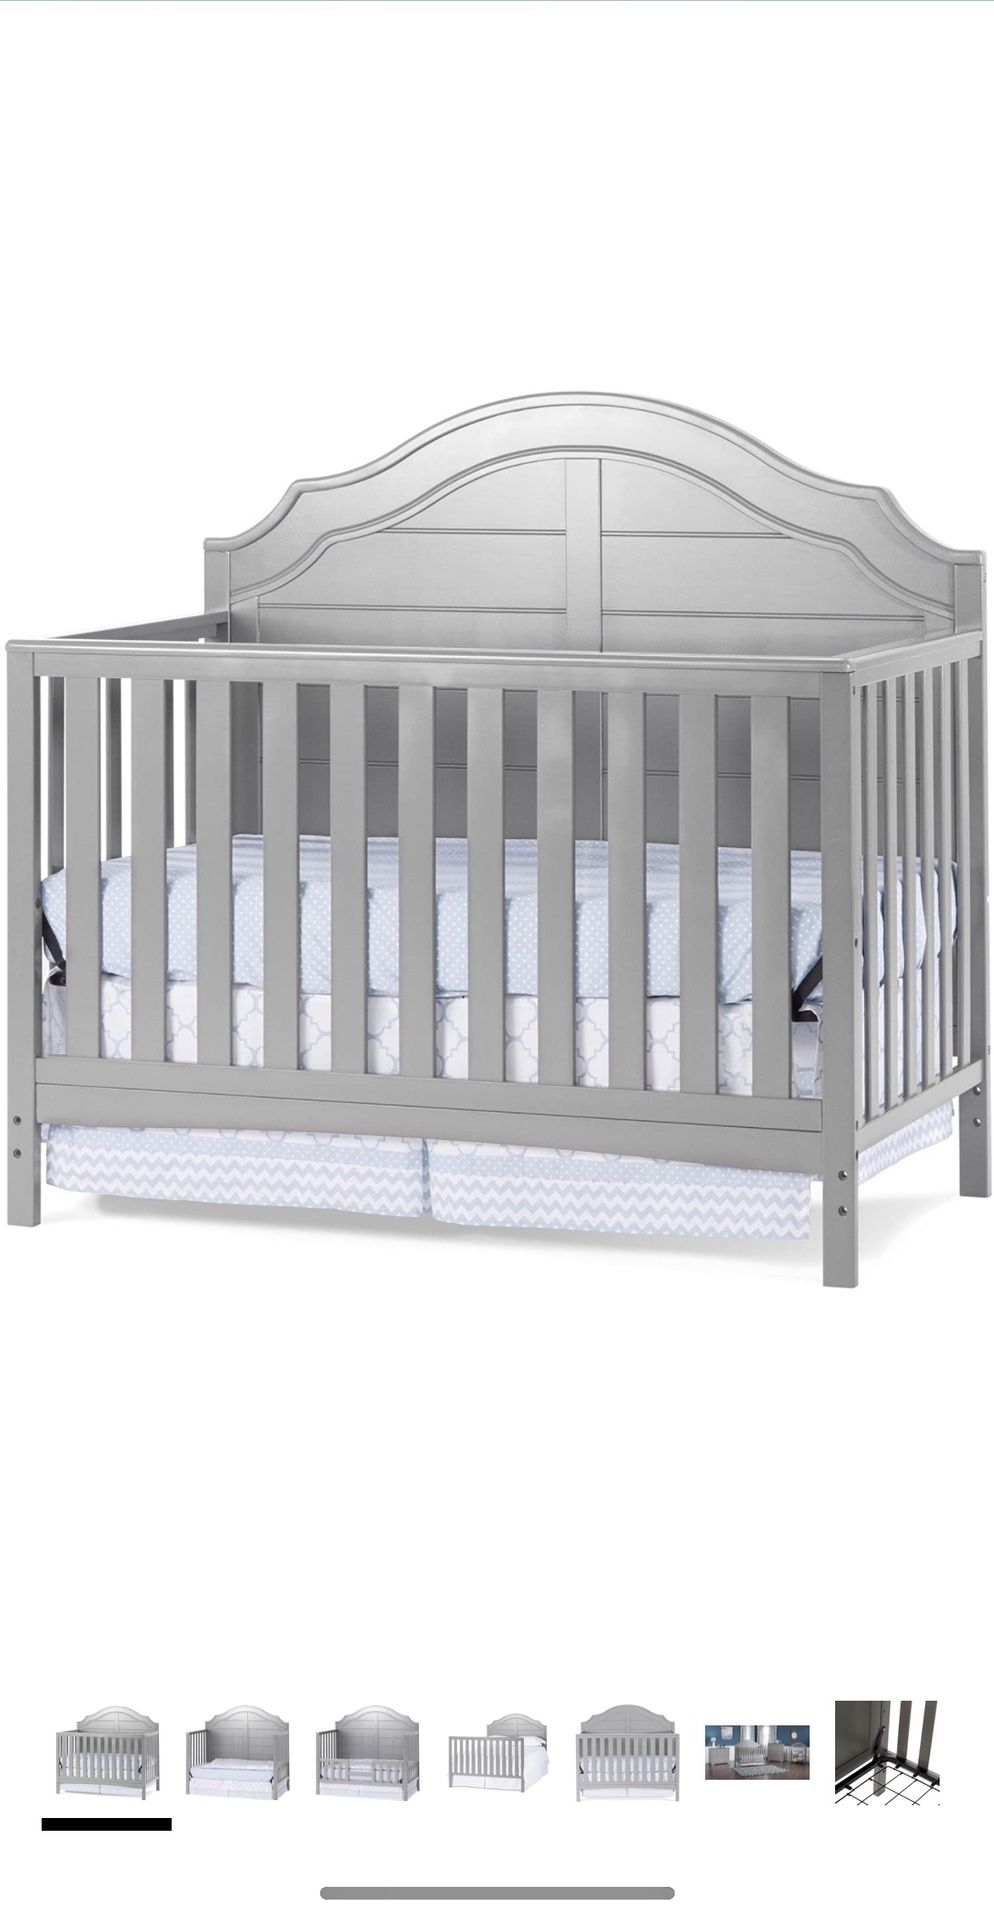 Convertible Crib and Changing Table